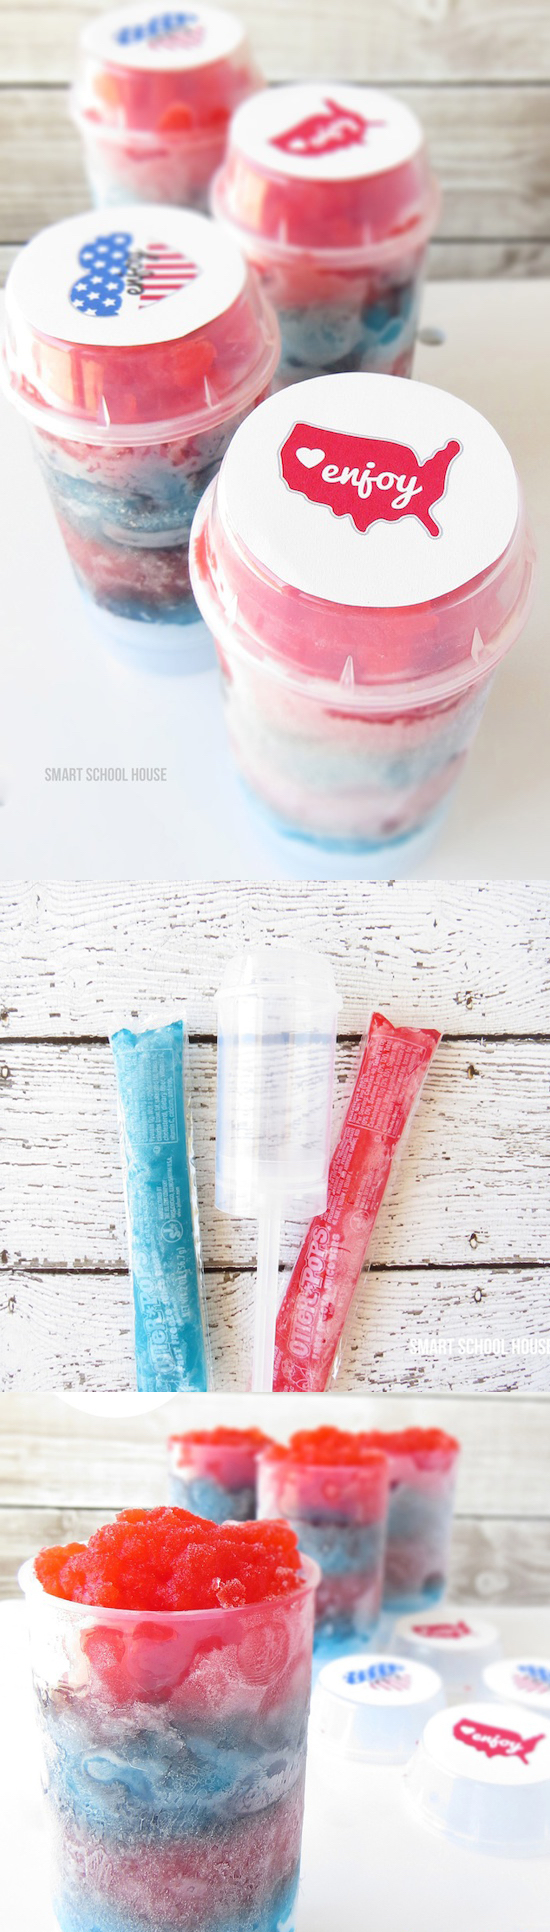 Patriotic popsicles for the 4th of July or Memorial day. An easy red, white, and blue idea!